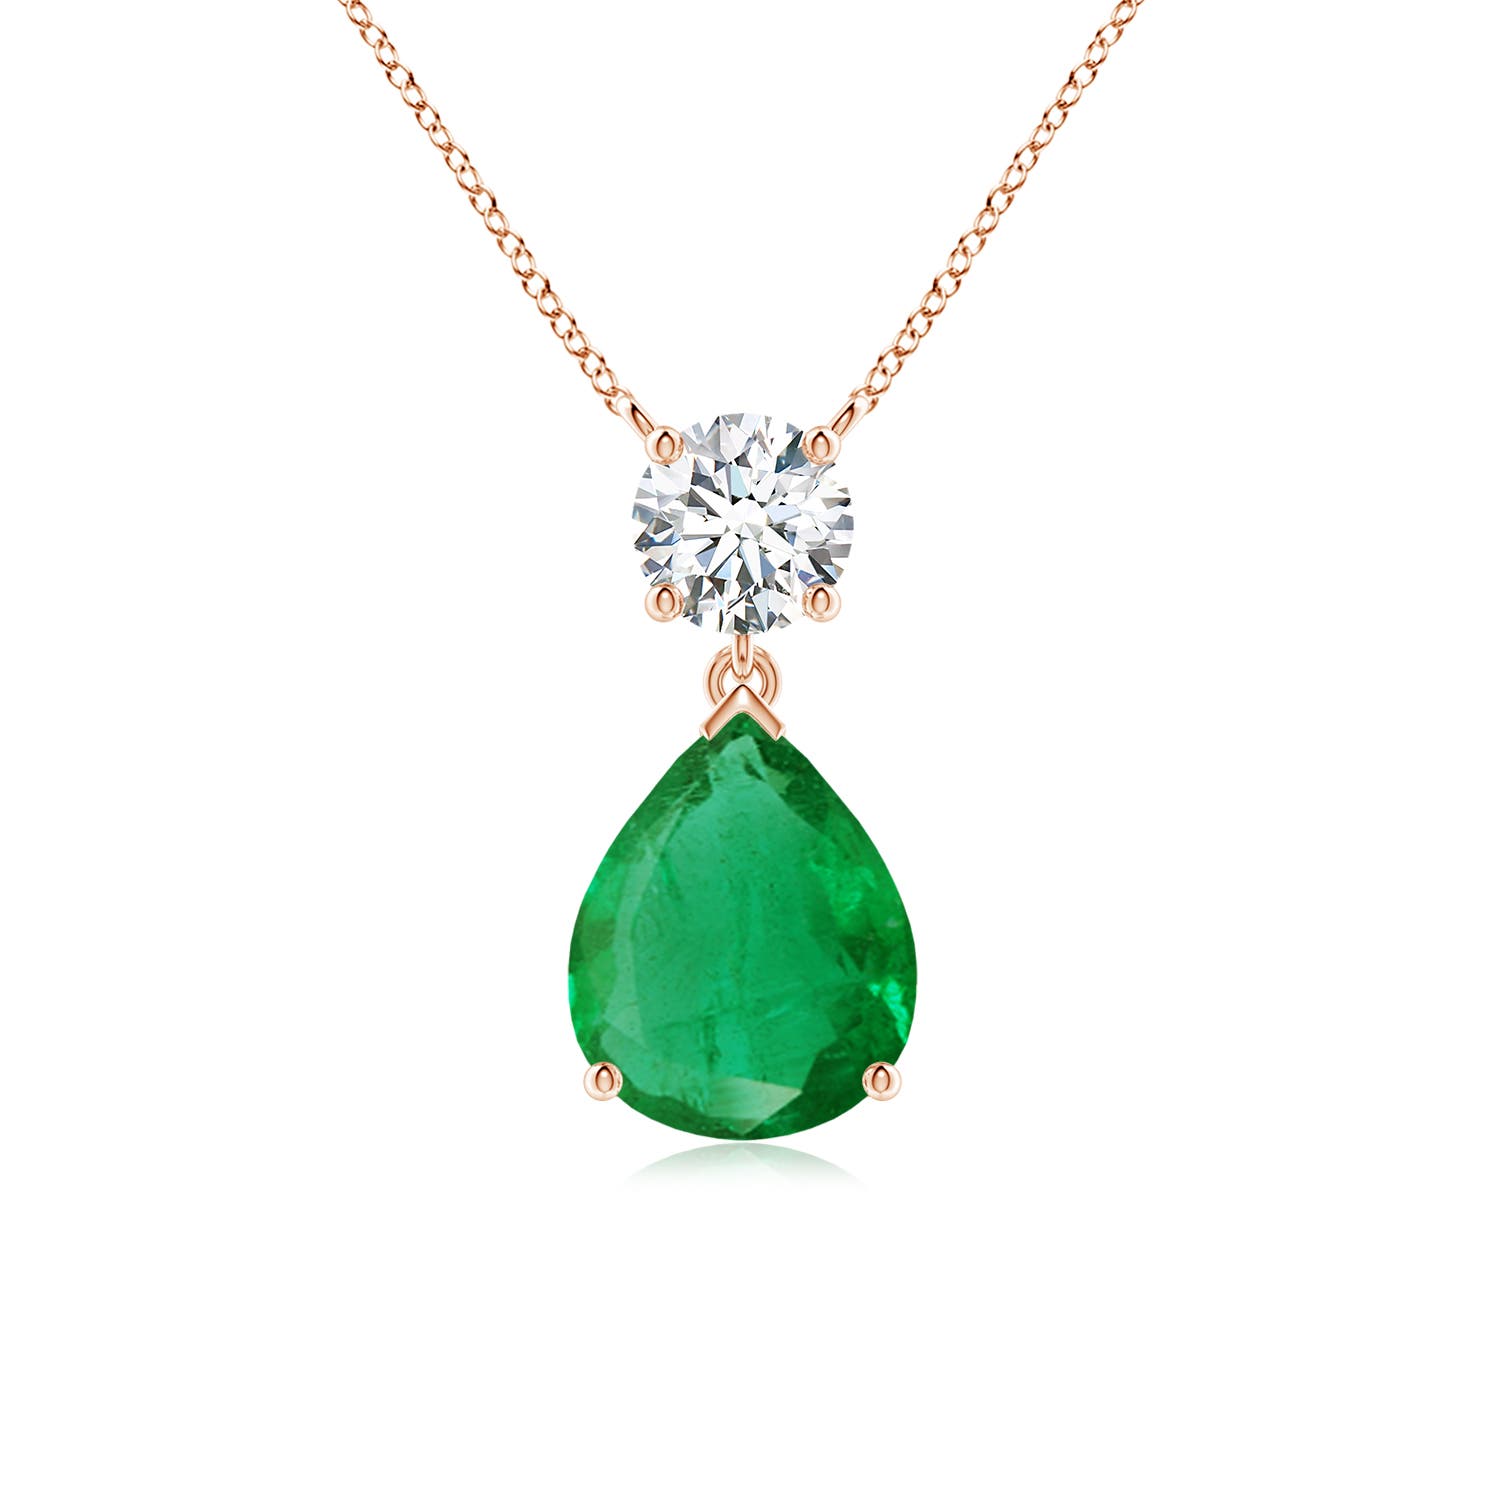 AA - Emerald / 3 CT / 14 KT Rose Gold